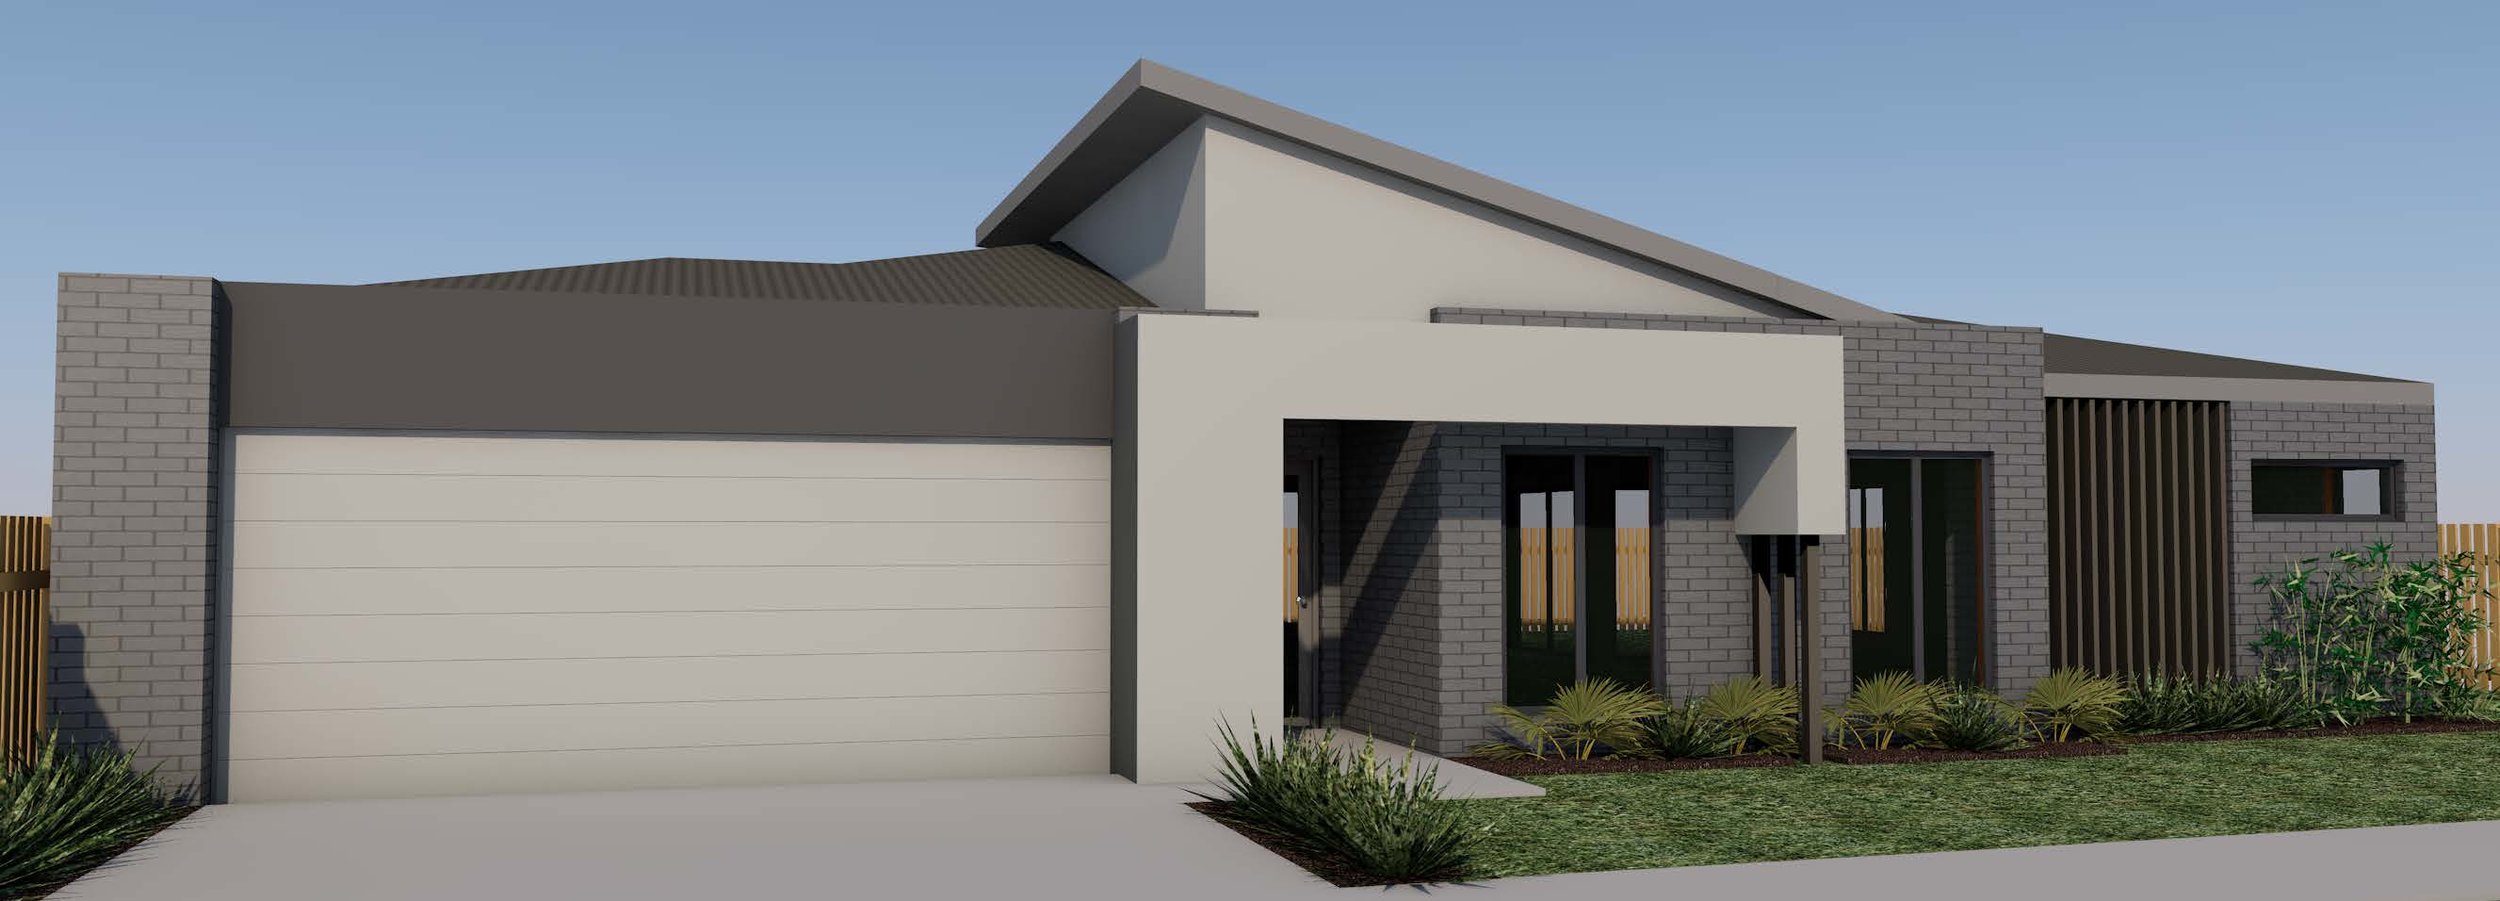 WD - Lot 98 Lighthorse Ave, Traralgon _Page_5_Image_0002.jpg